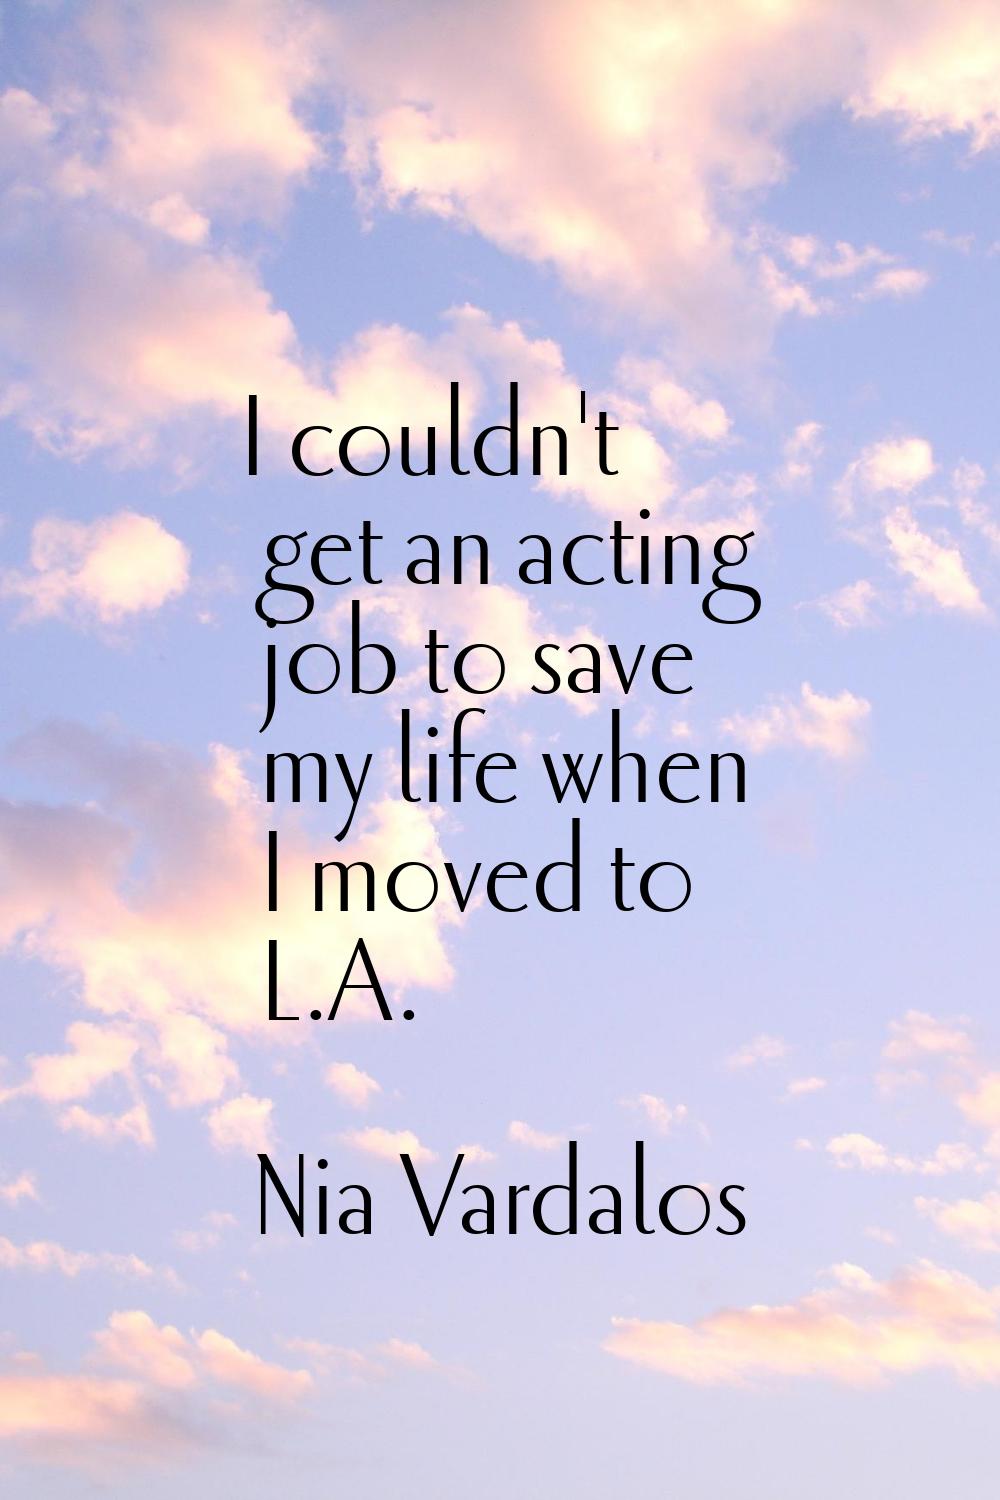 I couldn't get an acting job to save my life when I moved to L.A.